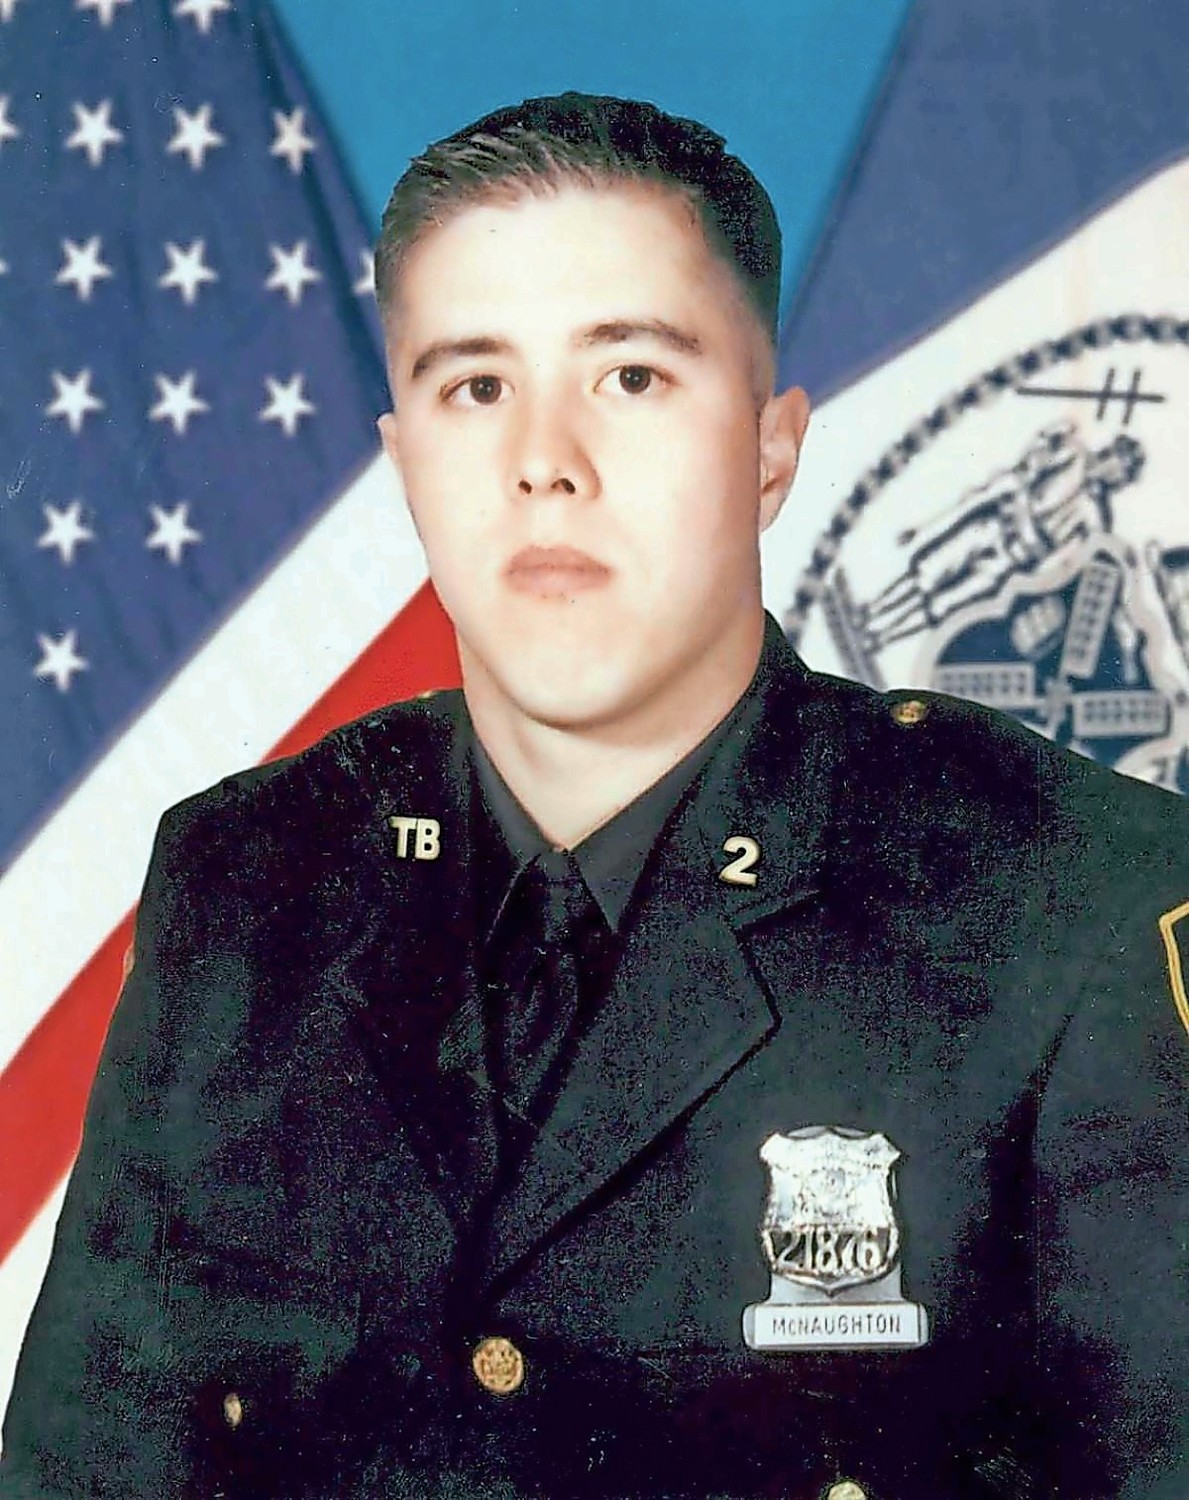 The 13th annual tribute to James McNaughton, a former U.S. Army Reserve’s soldier and New York City police offer, will be held at Mulcahy’s Pub and Concert Hall in Wantagh on Jan. 27.